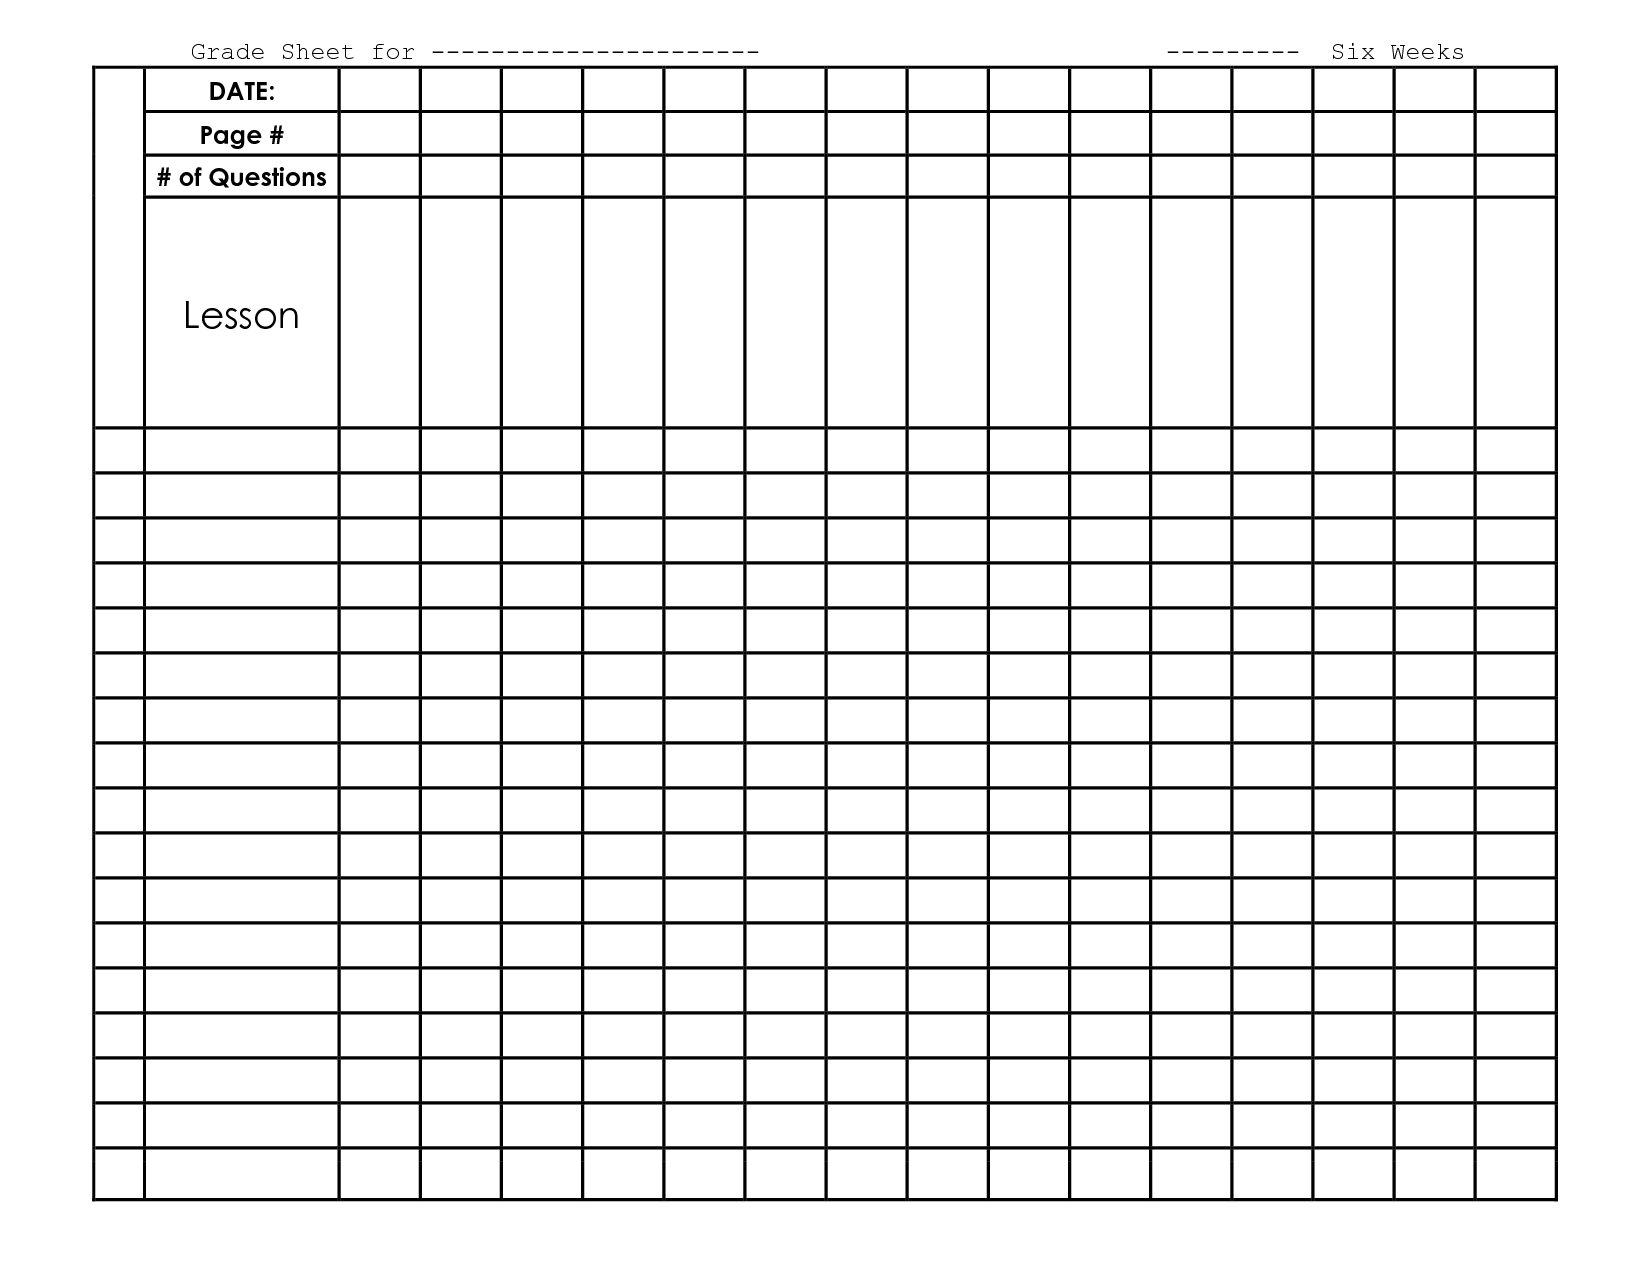 FREE grade record sheet (26 students) by Adrienne Wiggins | TpT